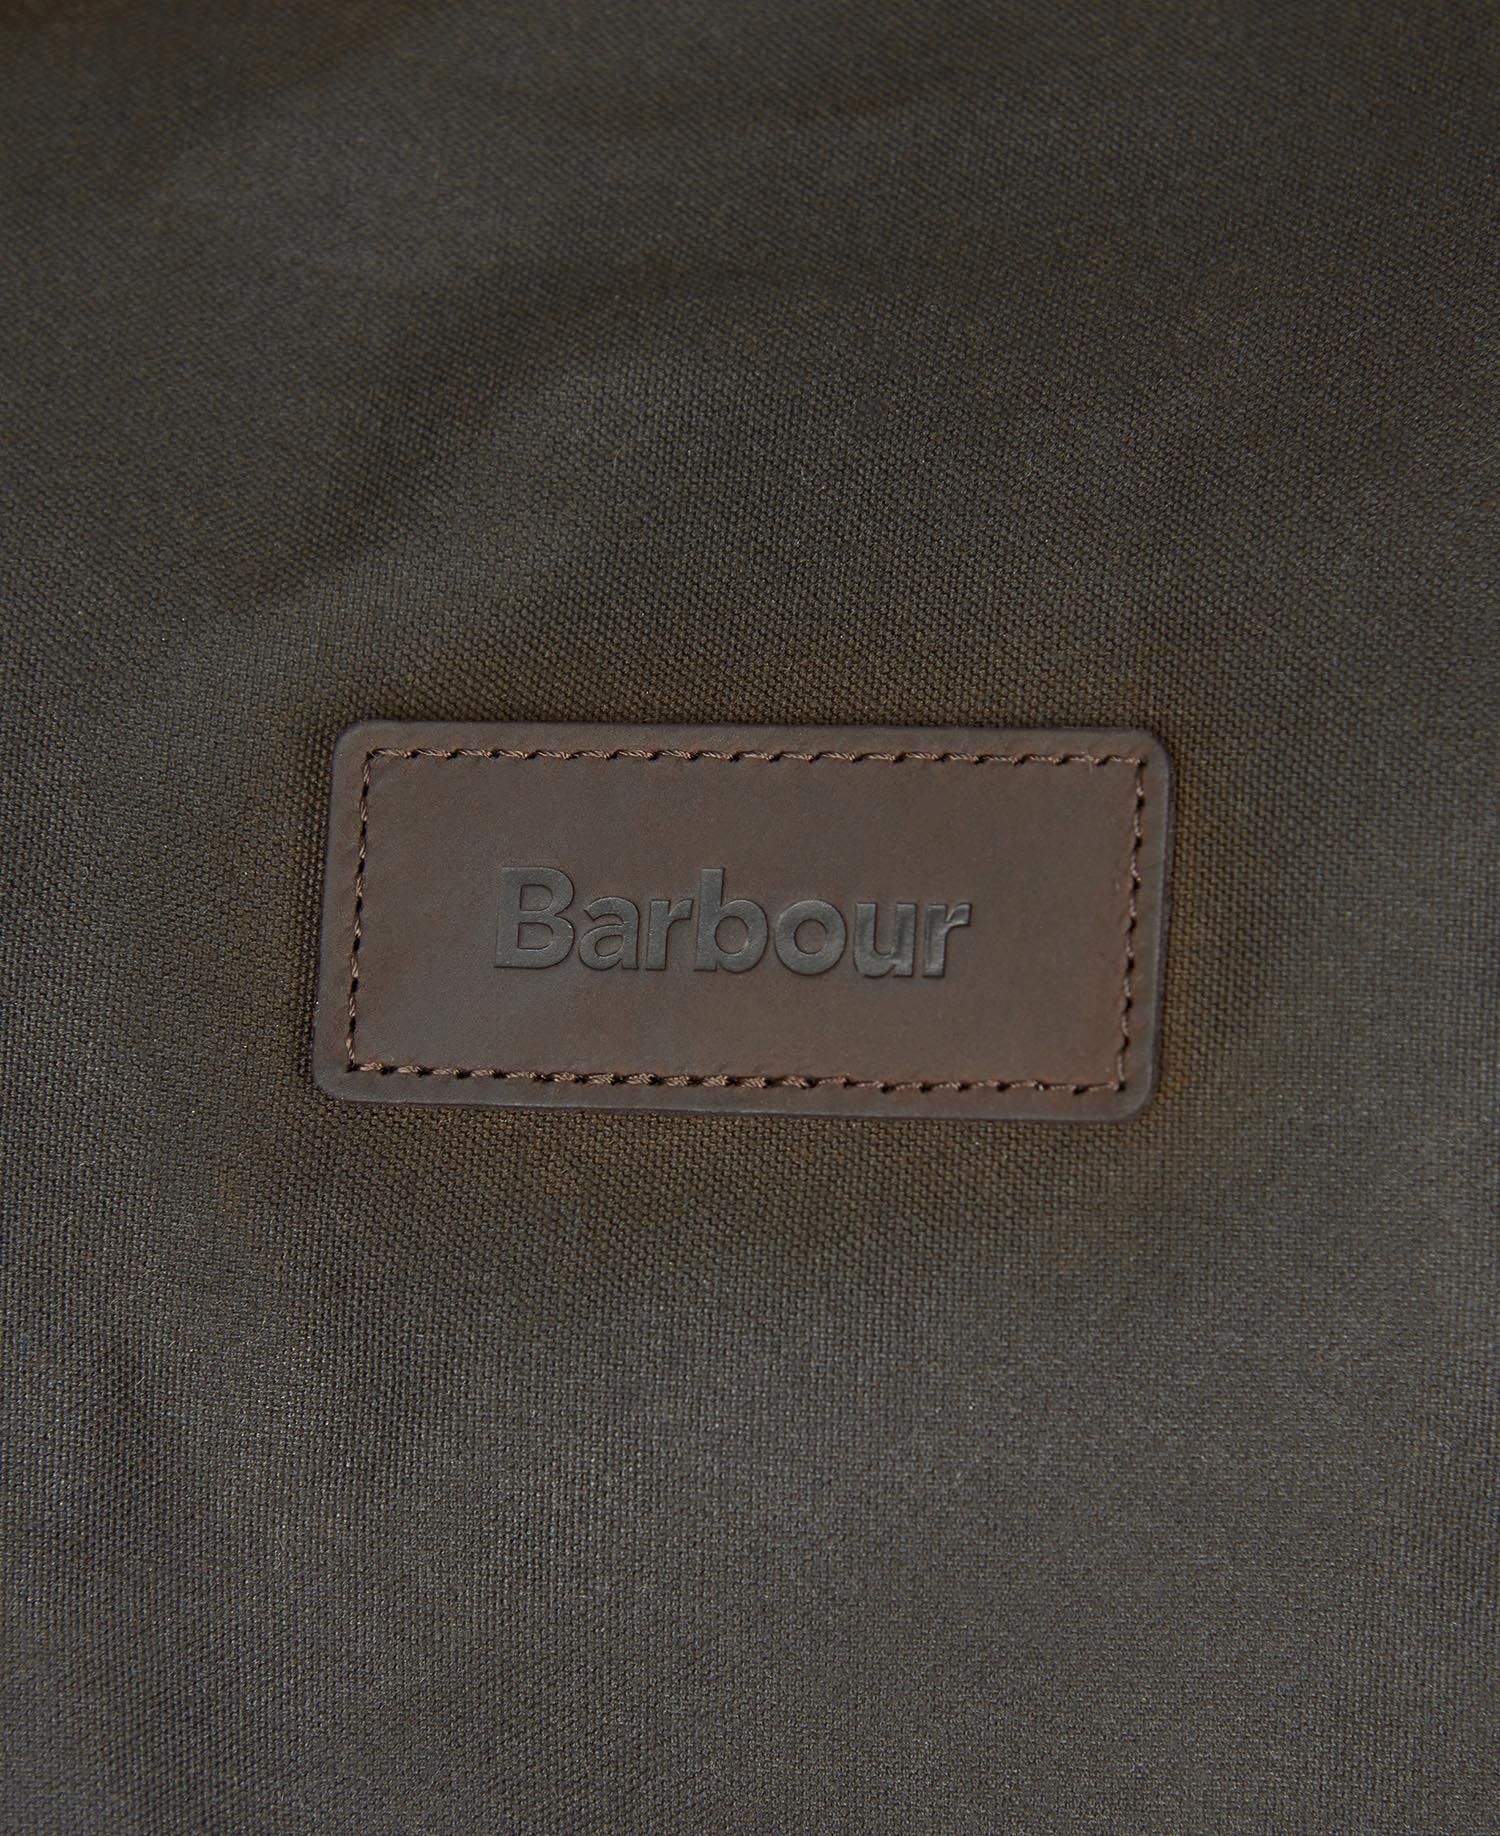 Barbour Wax Holdall in Olive | Barbour